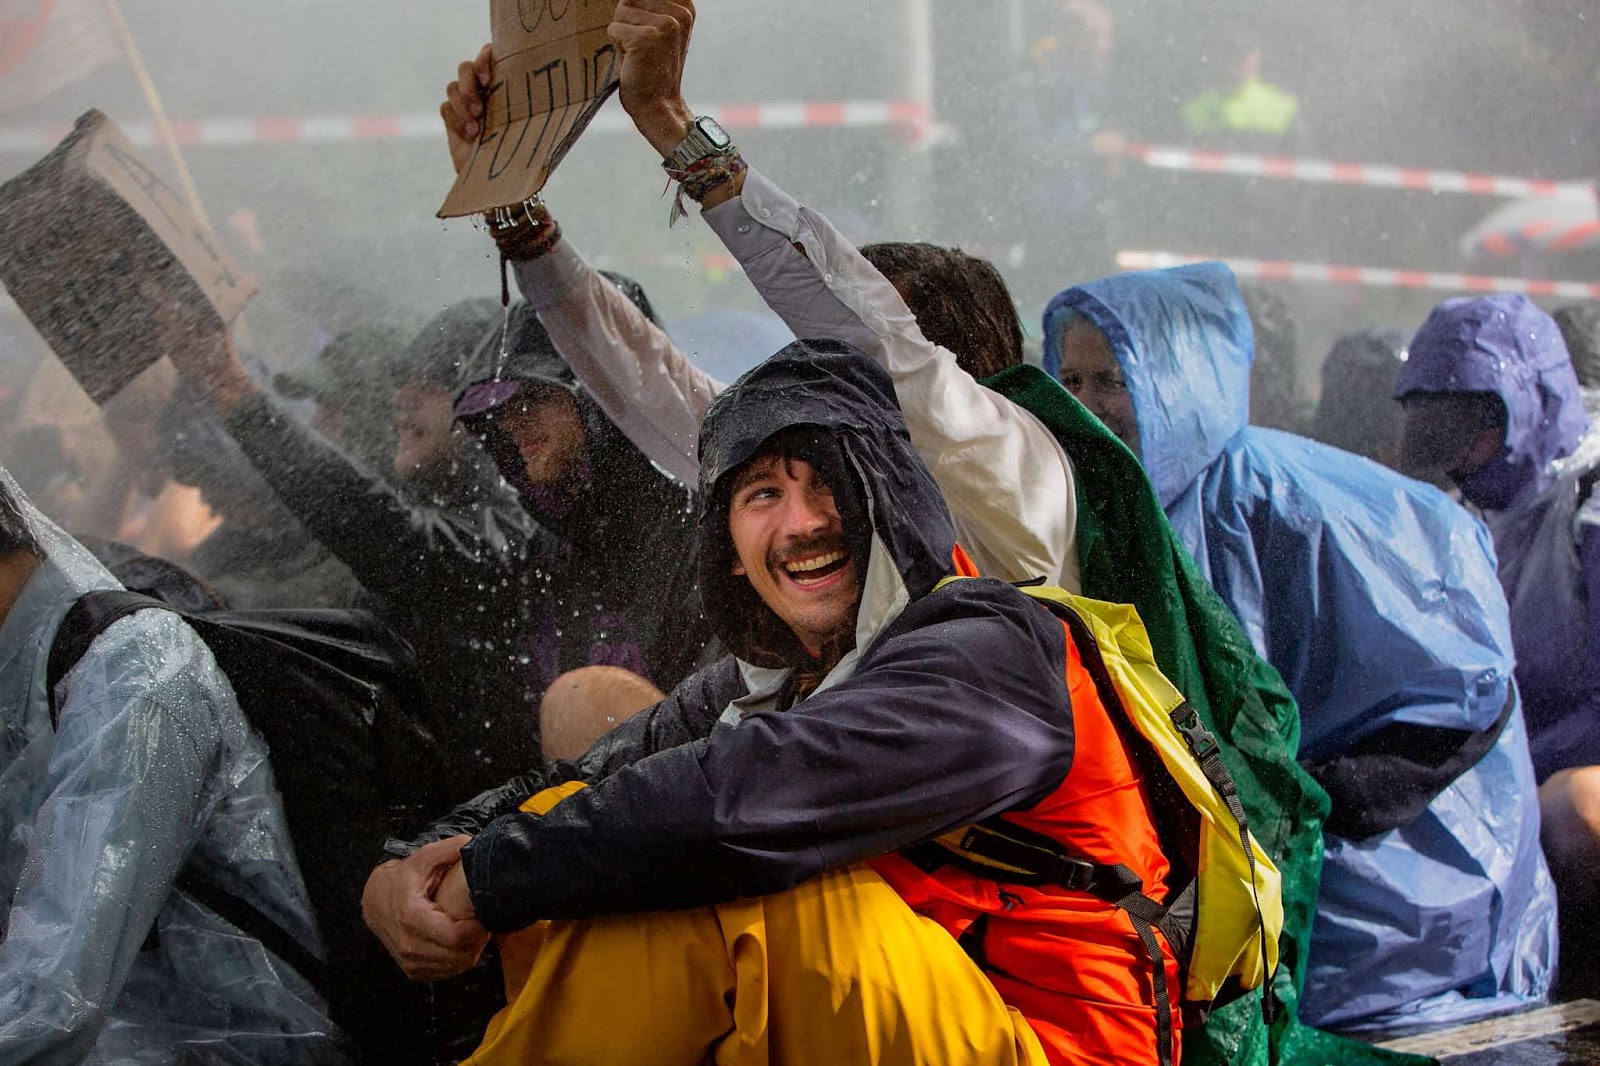 A rebel in waterproofs laughs as police spray protesters during the A12 blockade